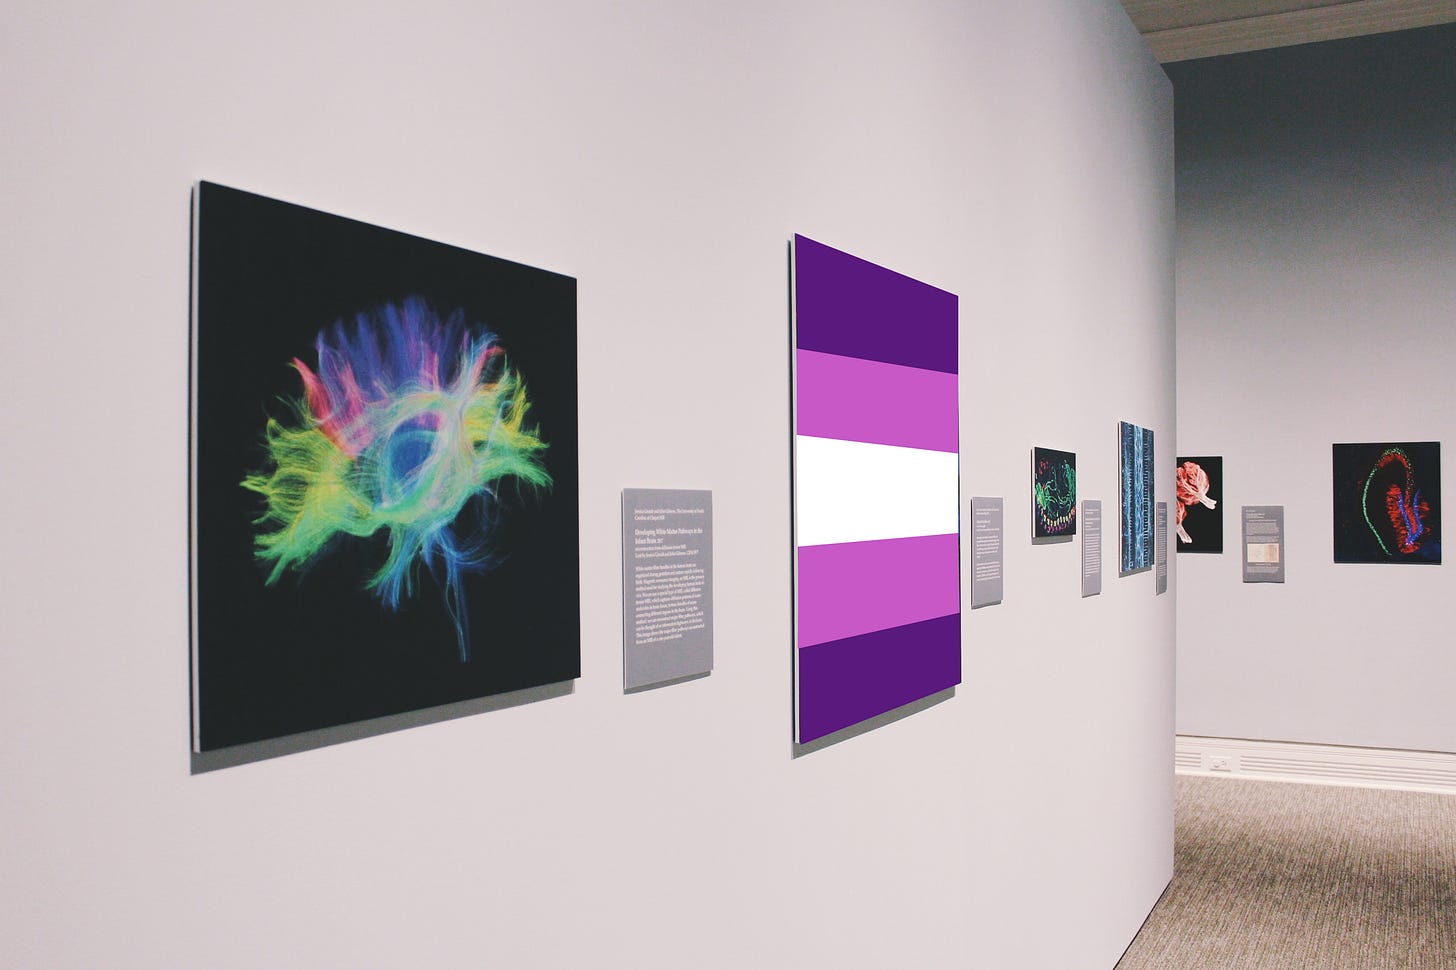 A sock image of a photo gallery with neuroscience art depicting the nervous system. One of the works of art has been overlaid with an image of the trans feminist flag (in order top-down, purple, pink, white, pink, and purple stripes).